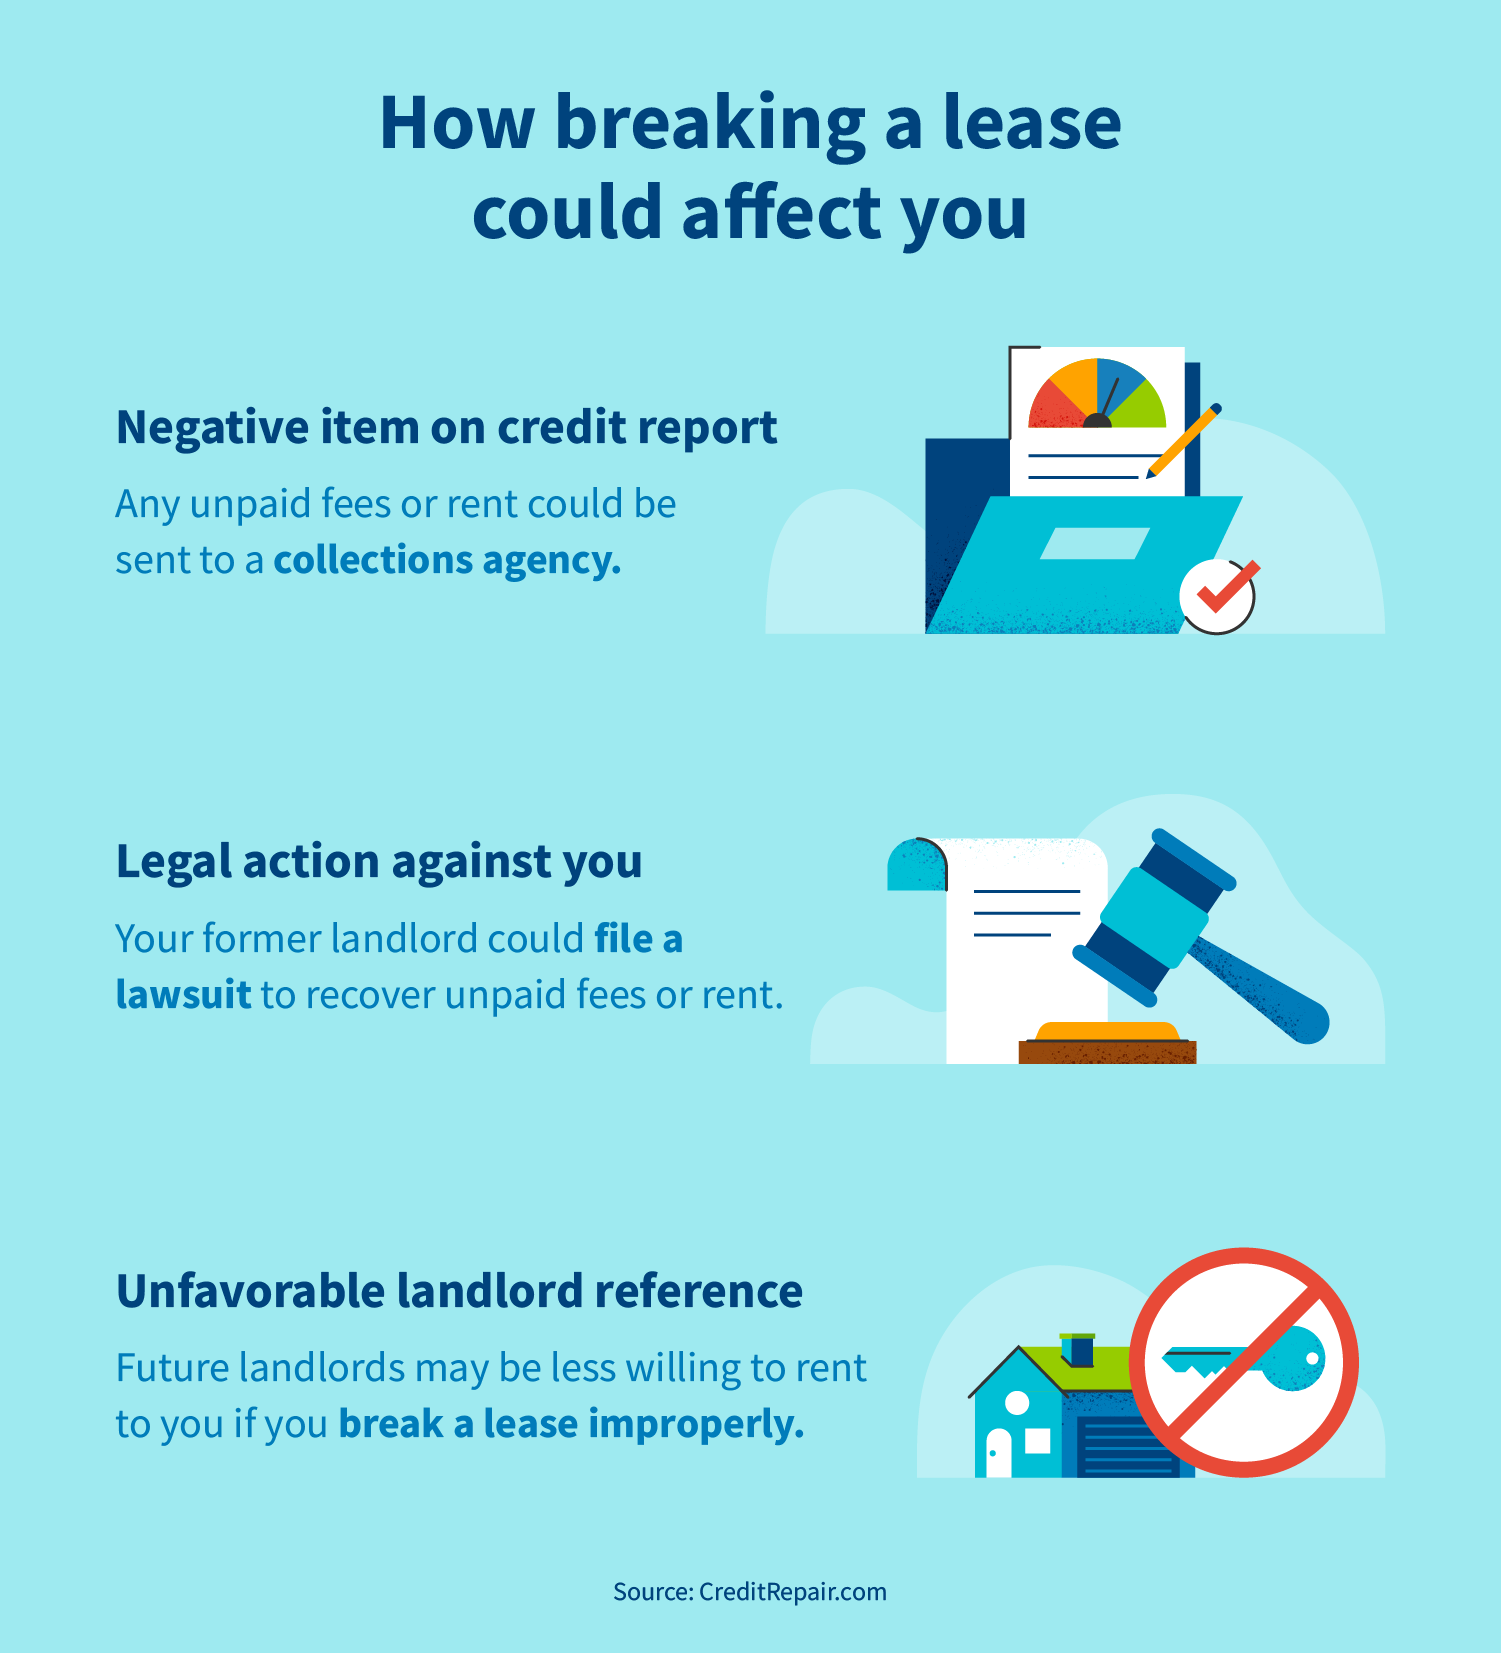 How breaking a lease could affect you